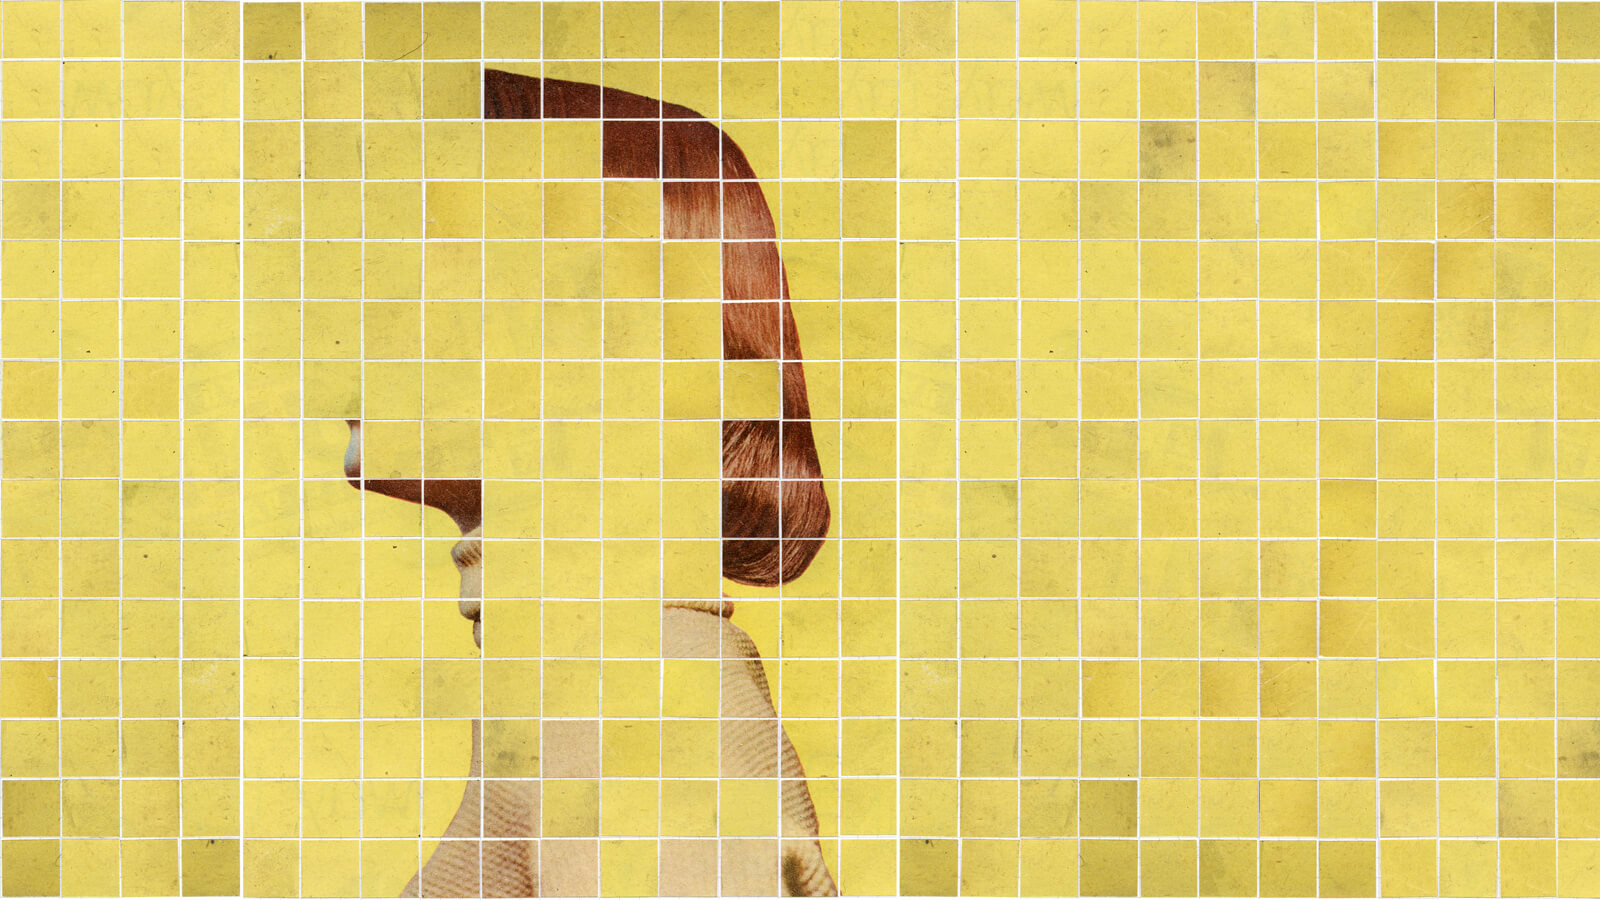 An image of a woman's face obscured by yellow squares in a collage illustration